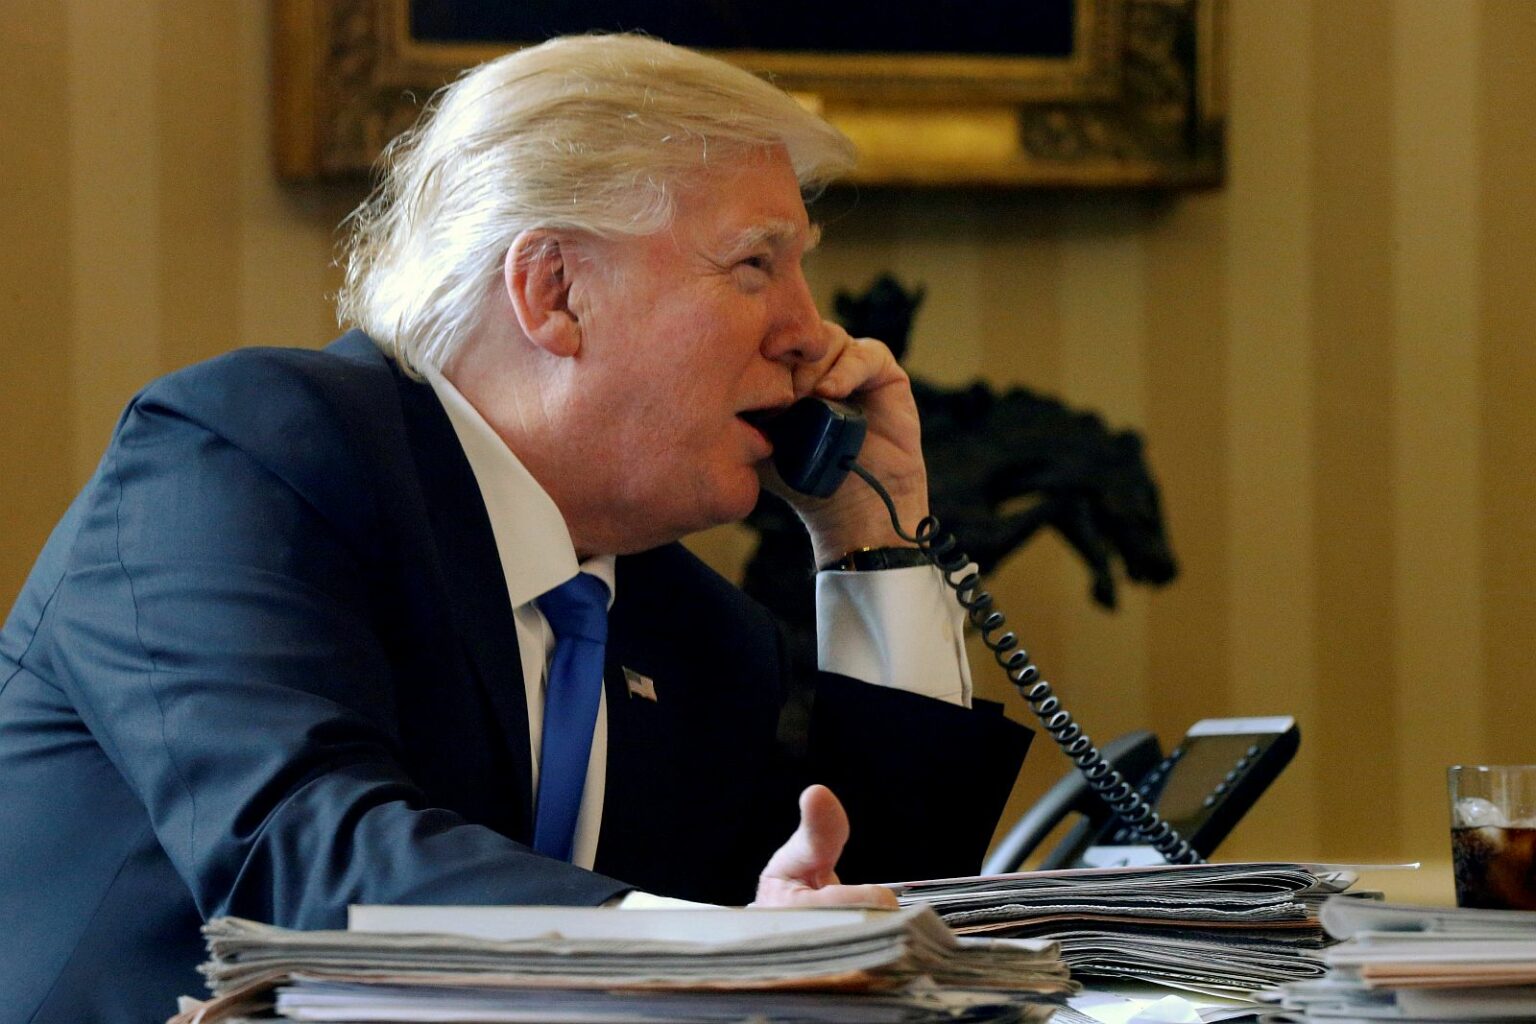 U.S. President Donald Trump speaks by phone with Russia's President Vladimir Putin in the Oval Office at the White House in Washington, U.S. January 28, 2017.